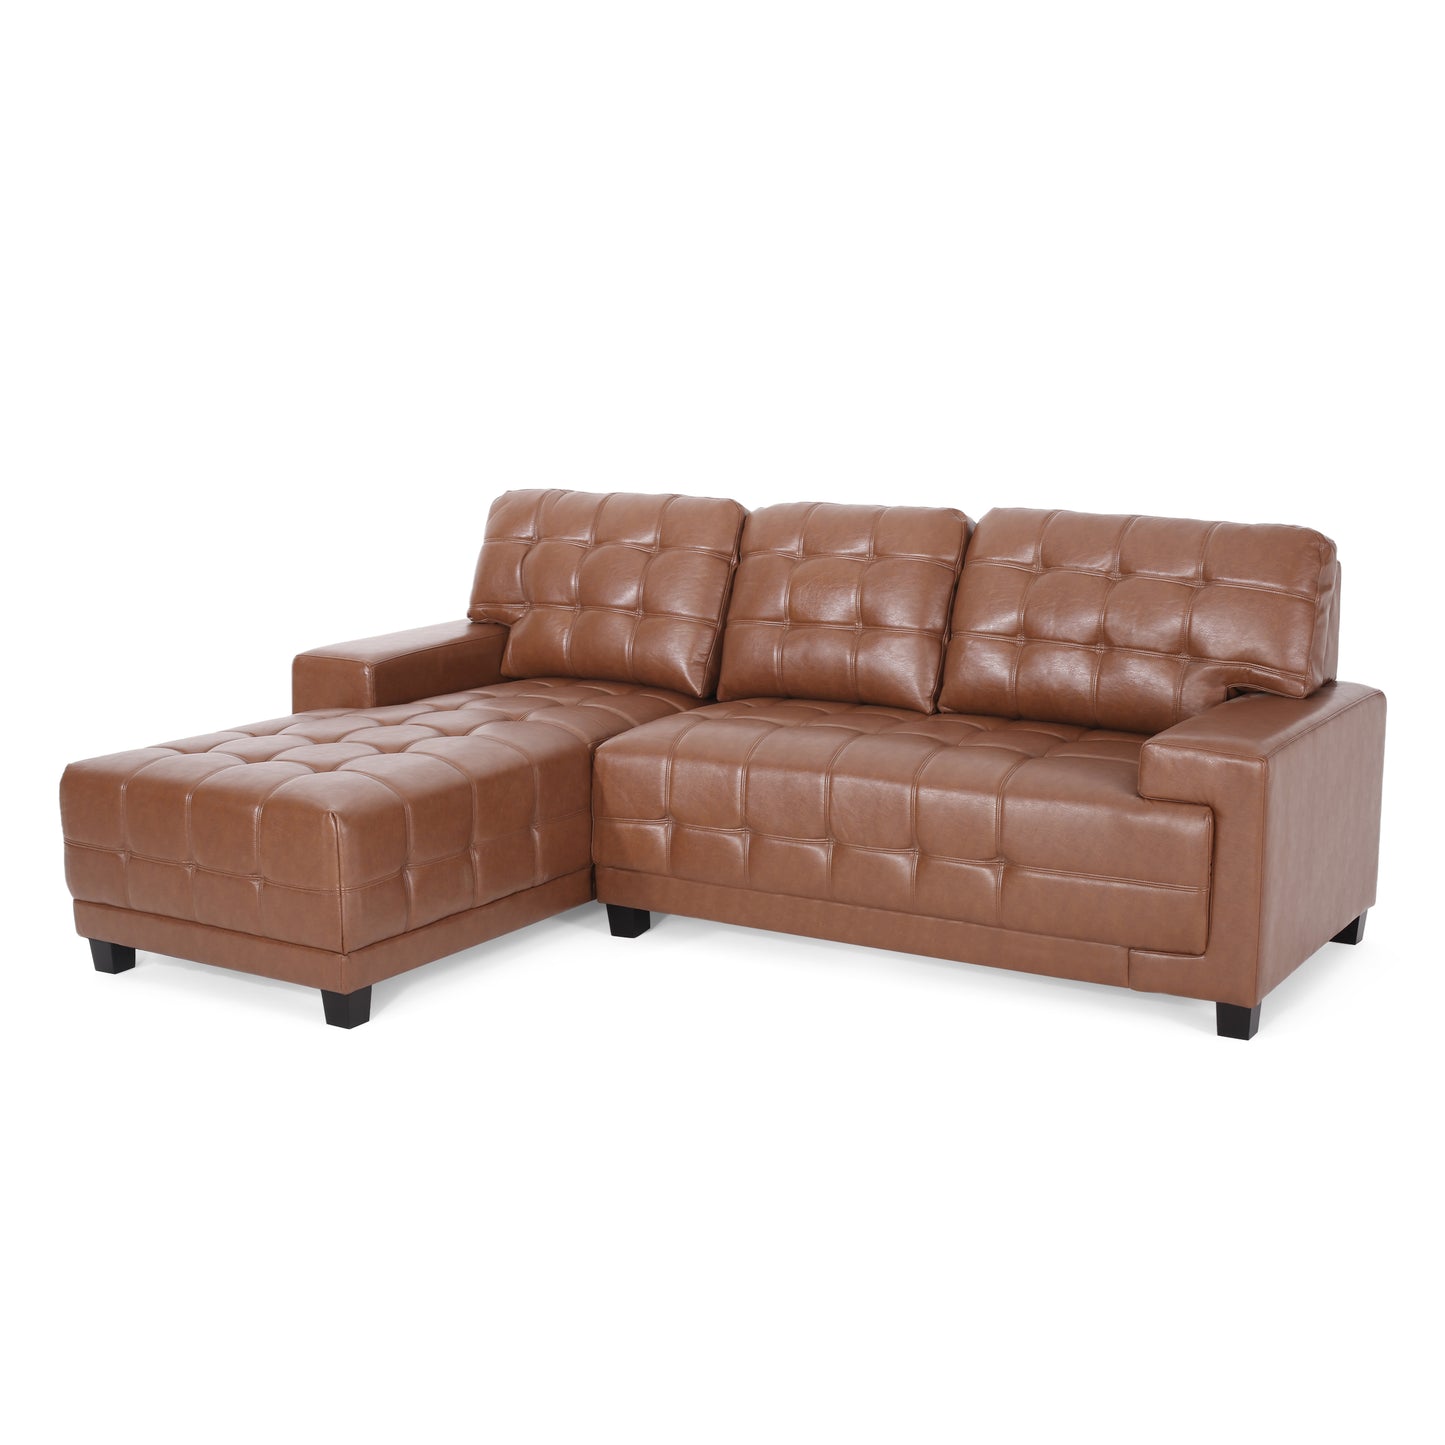 Littell Contemporary Faux Leather Tufted 3 Seater Sofa and Chaise Lounge Sectional Set